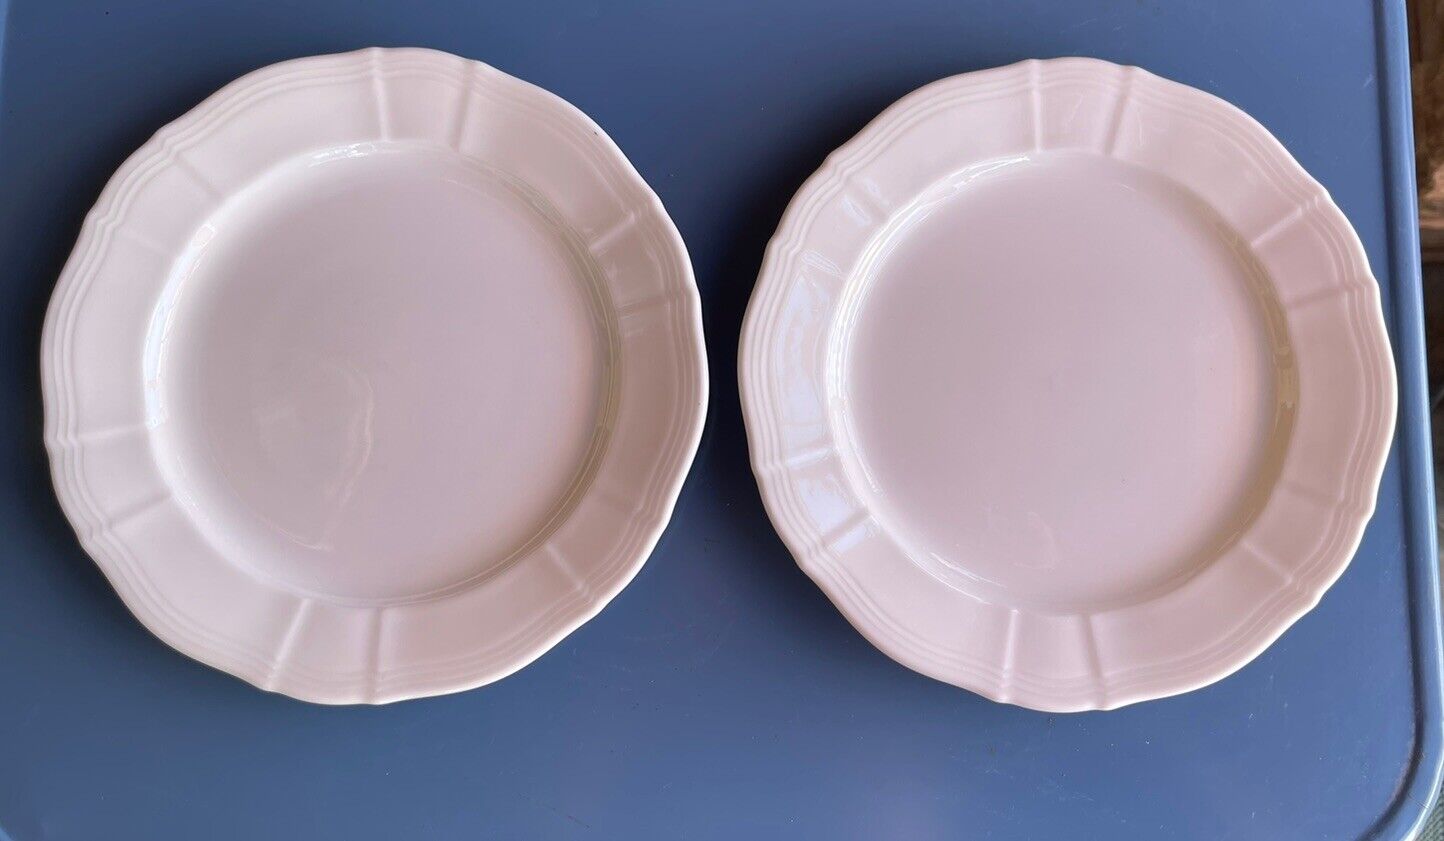 Royal Doulton Hallmark Dinner Plates 9.5” Set Of 2 Made in England New cond.